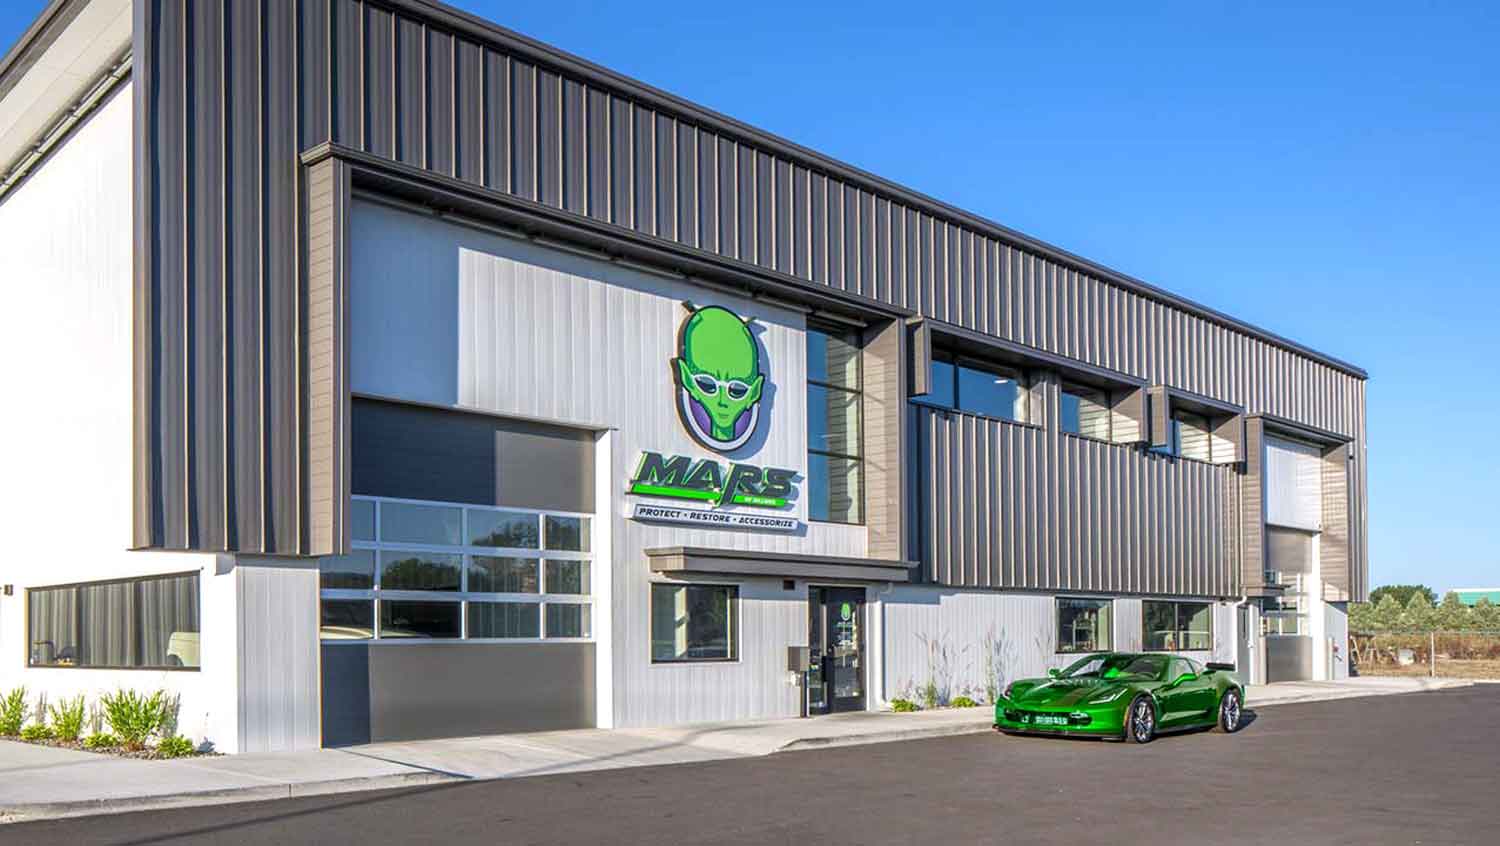 MARS of Billings center building exterior at an angle with green sports car parked